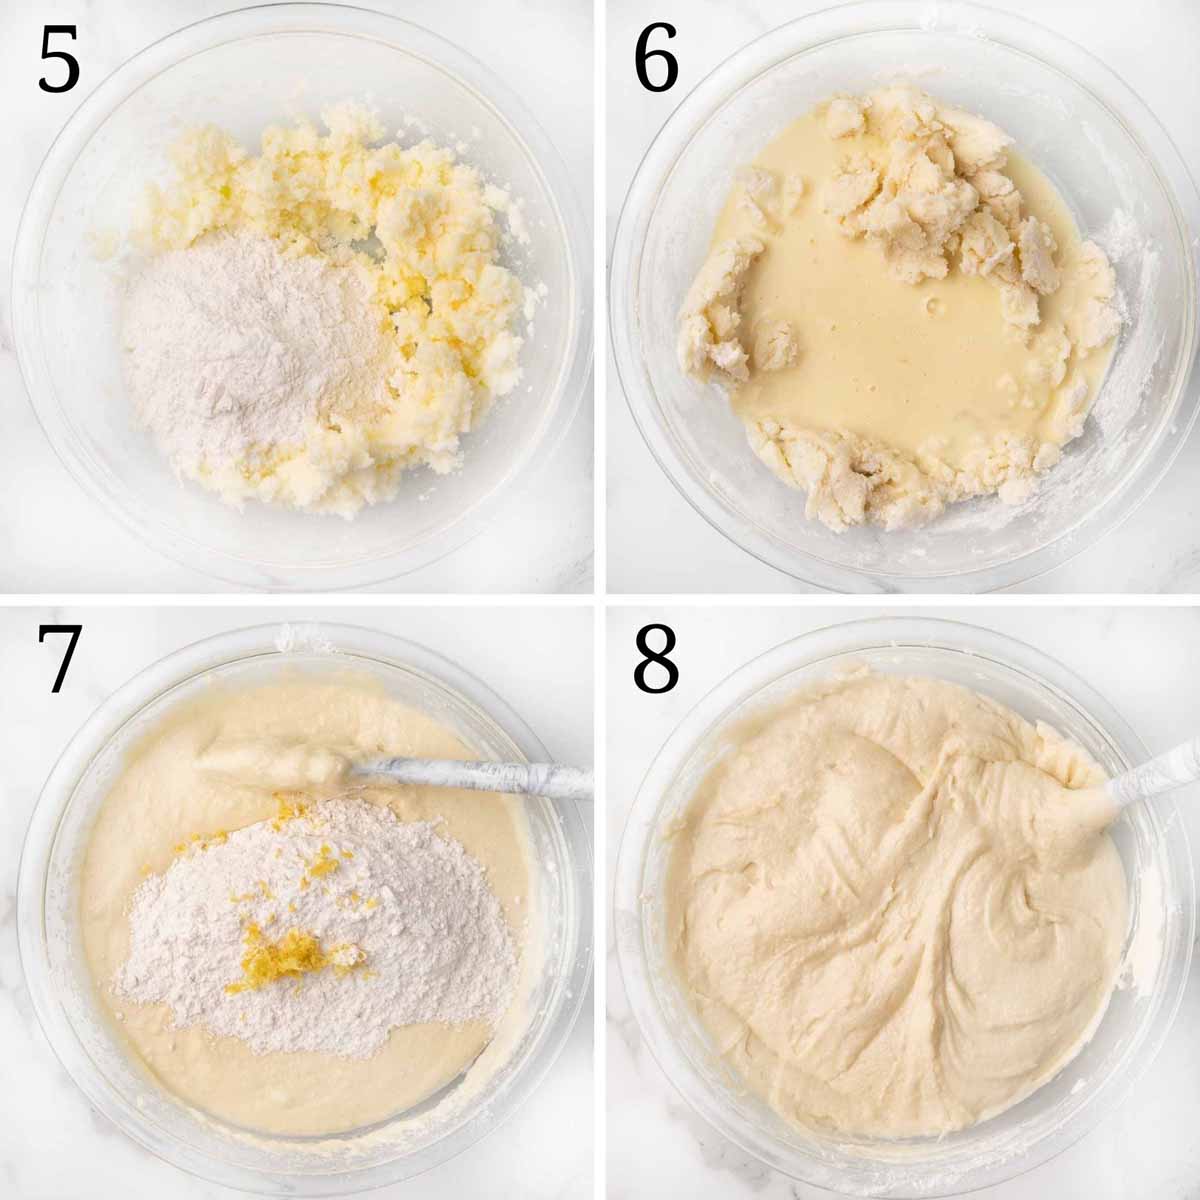 four images showing how to finish the cake batter